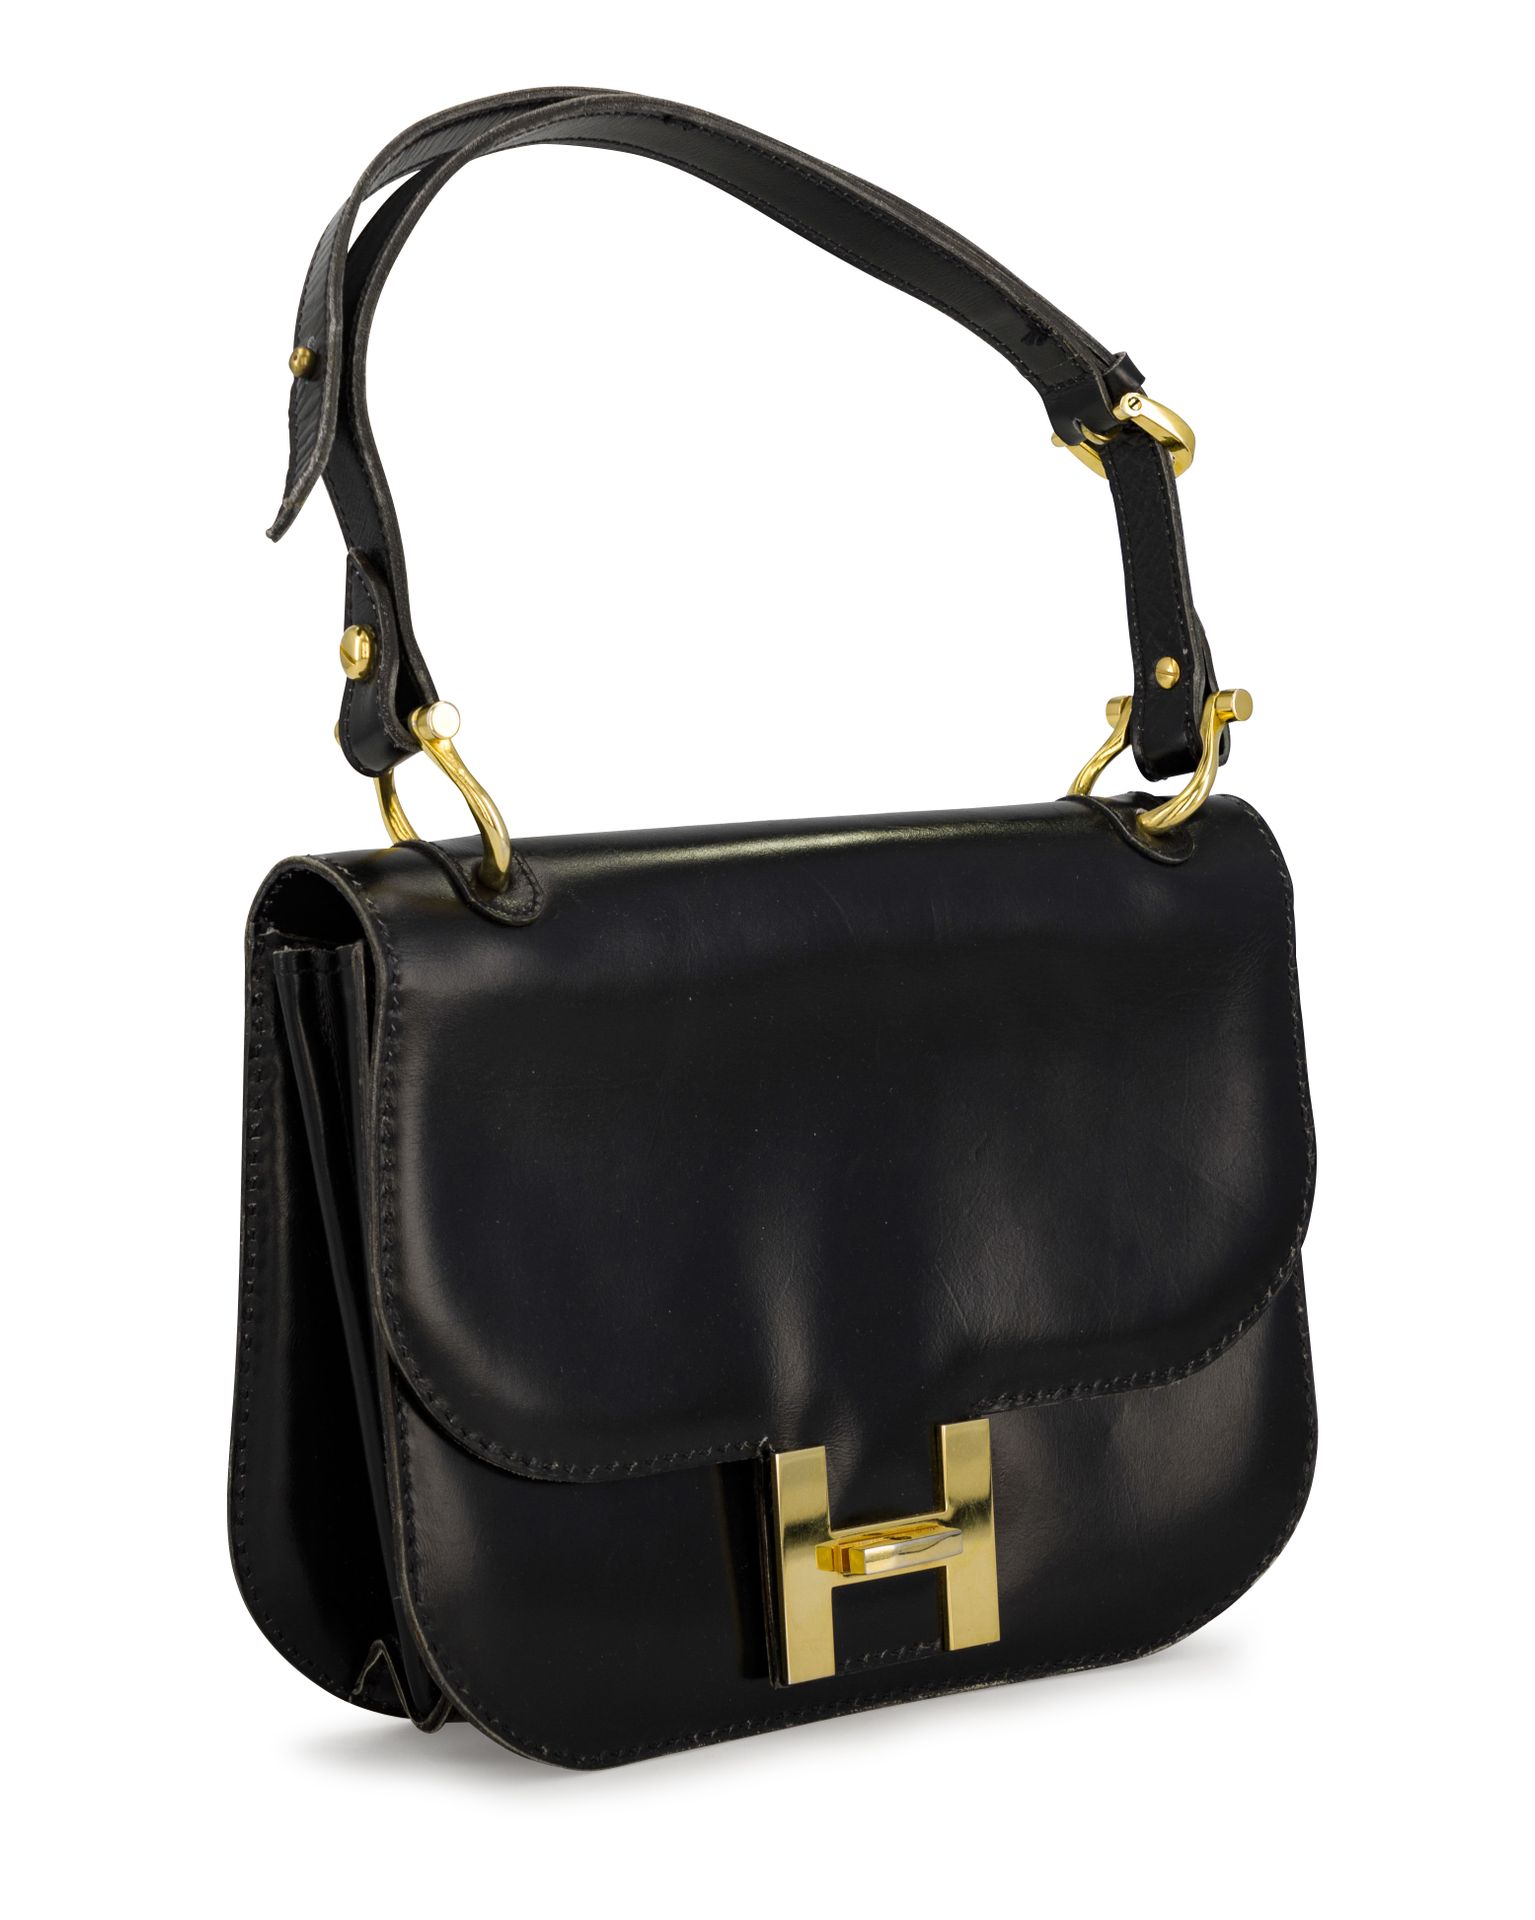 Null Anonymous. Black leather and gold metal bag. Dimensions: 27 x 19 x 6 cm